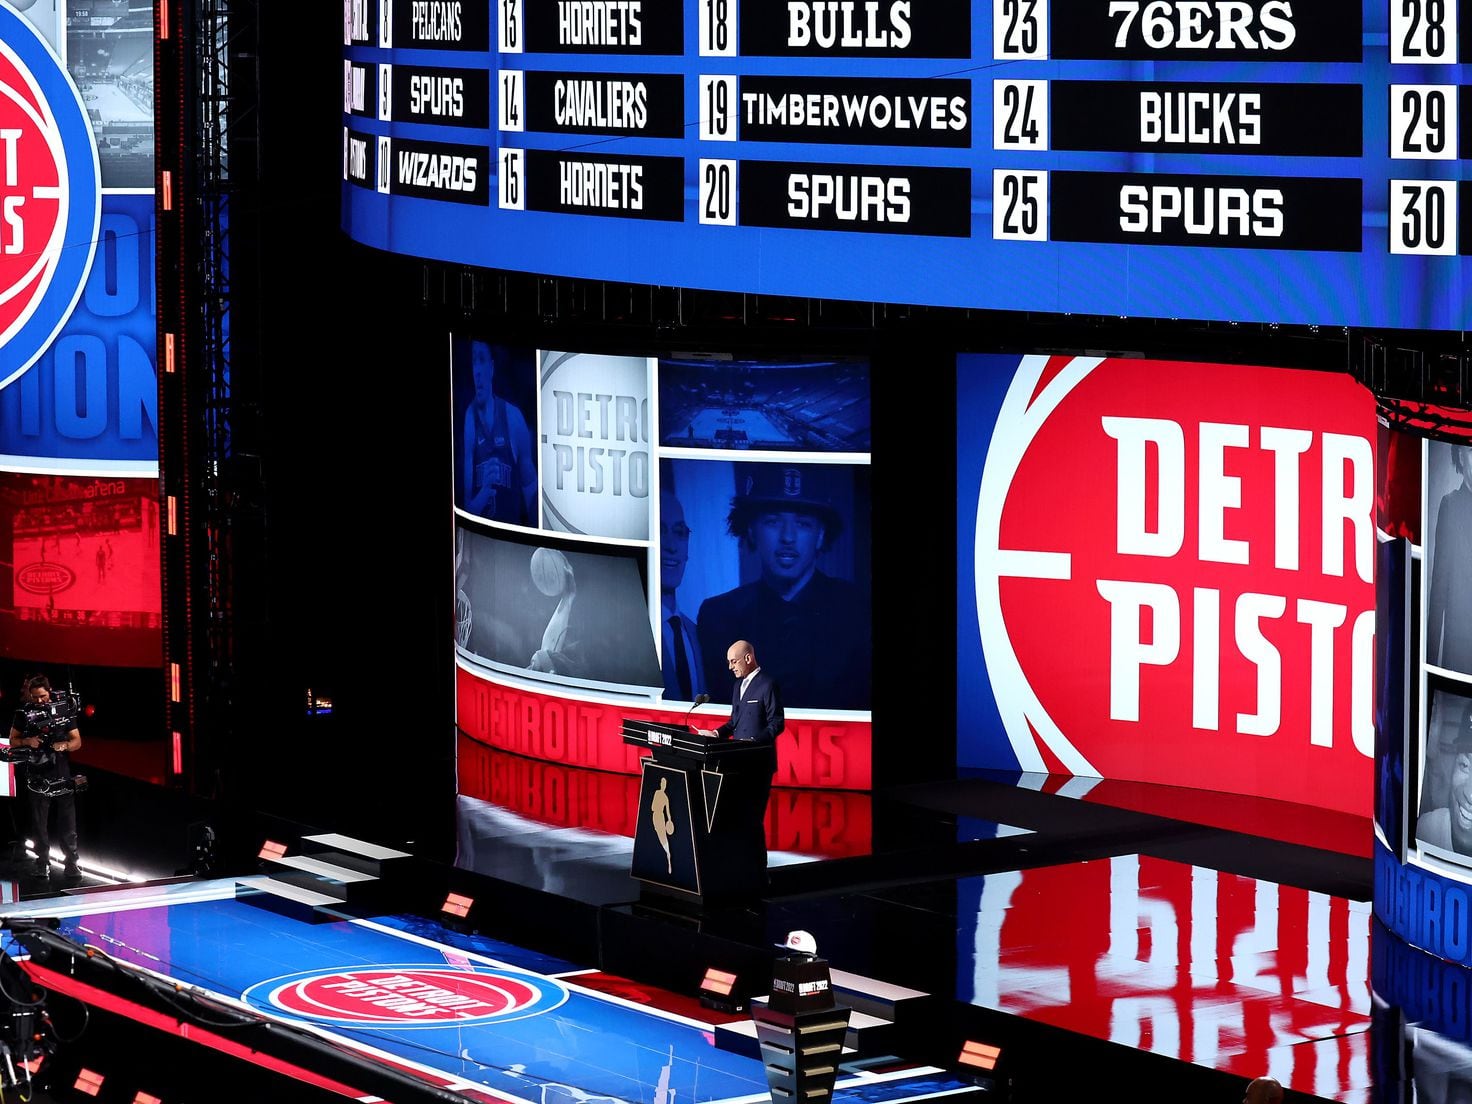 2023 NBA draft: Team-by-team analysis, projected picks, and needs